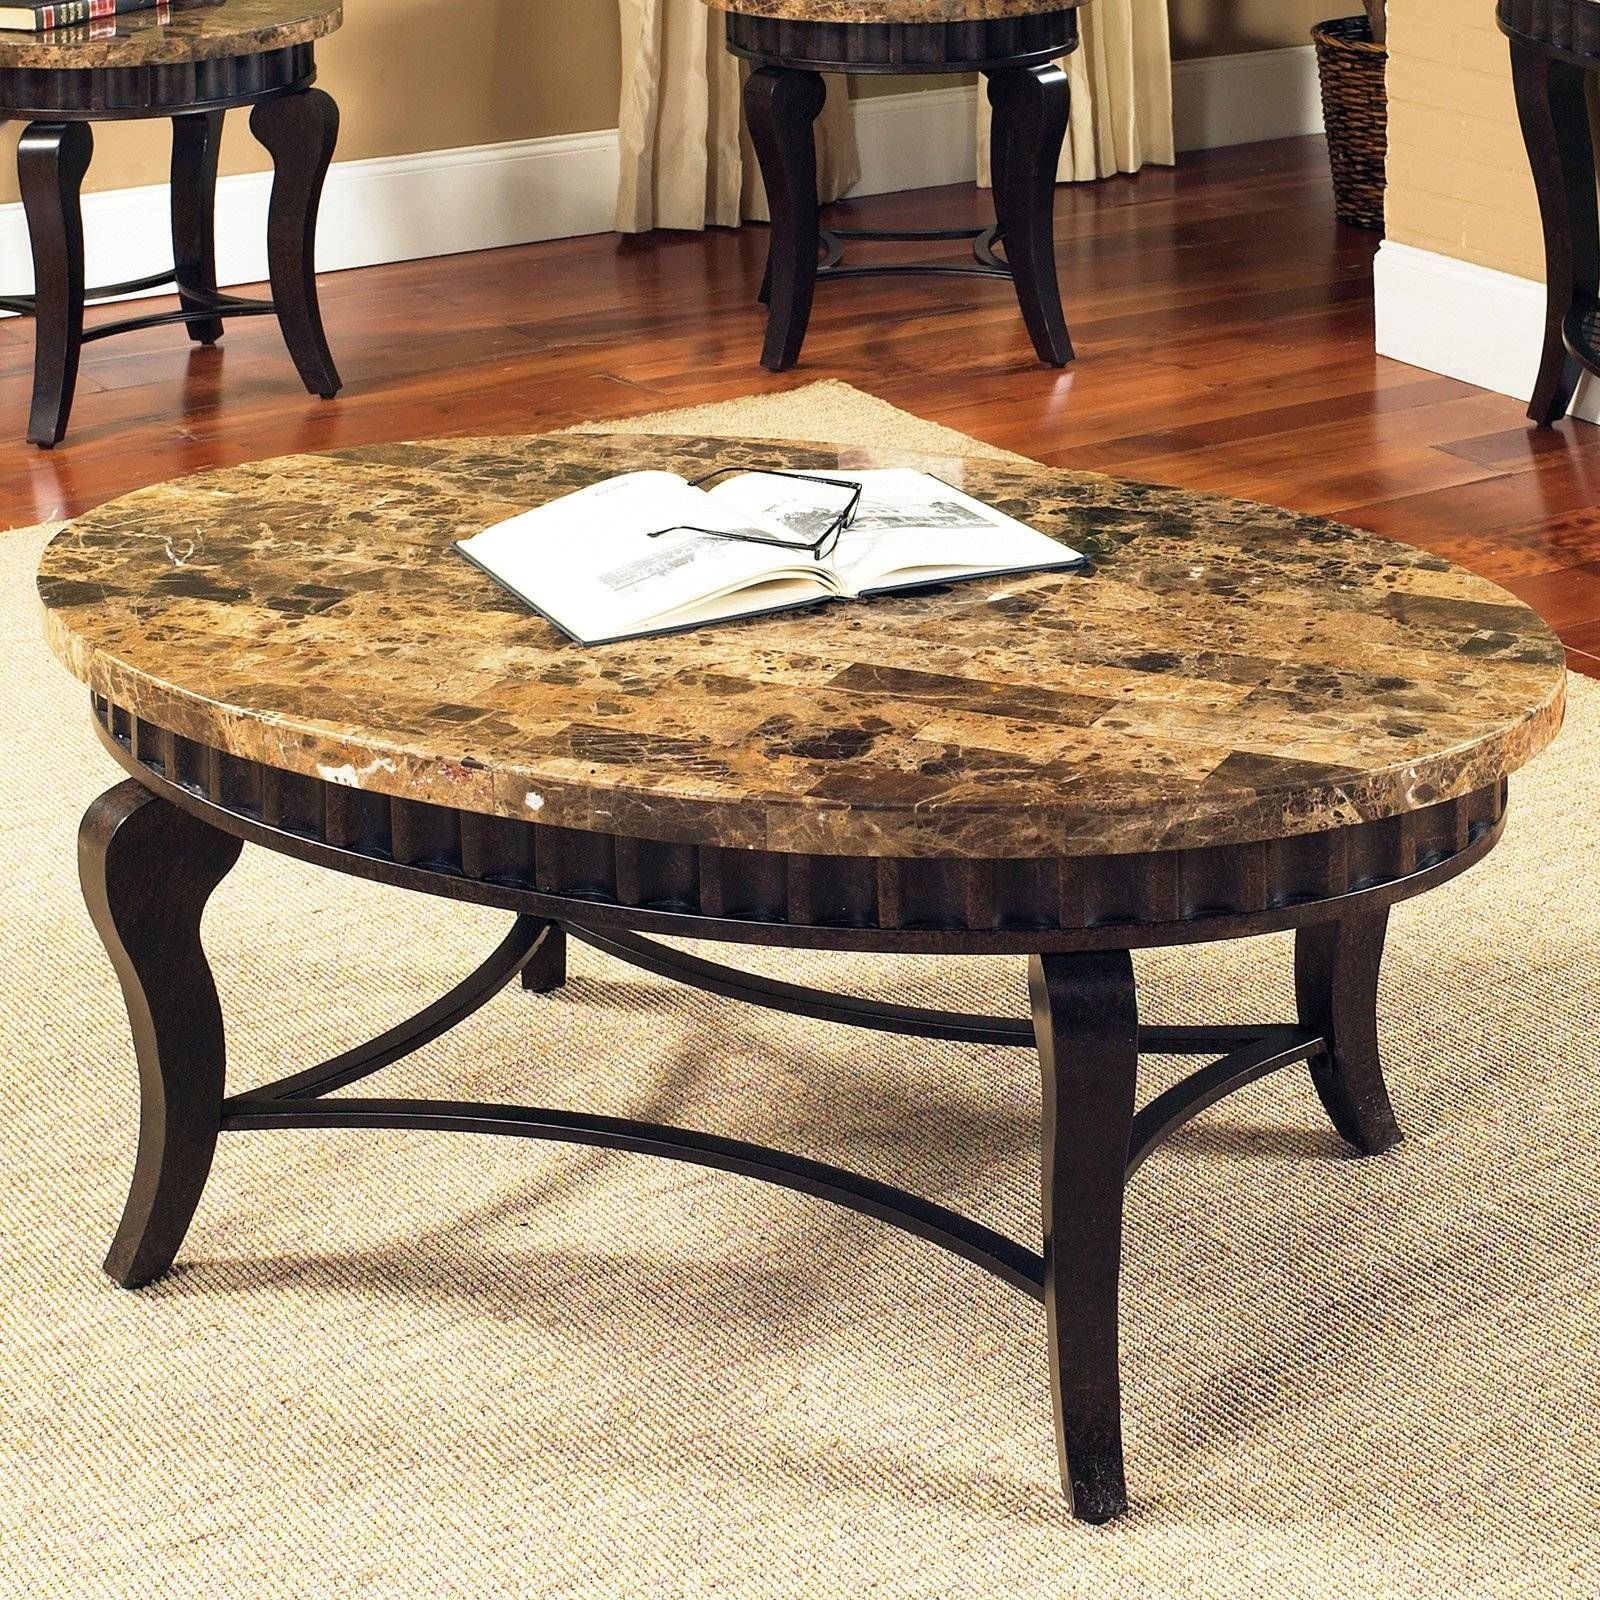 Decor Your Living Room In Style With Oval Coffee Table | Home Intended For Black And Grey Marble Coffee Tables (View 30 of 30)